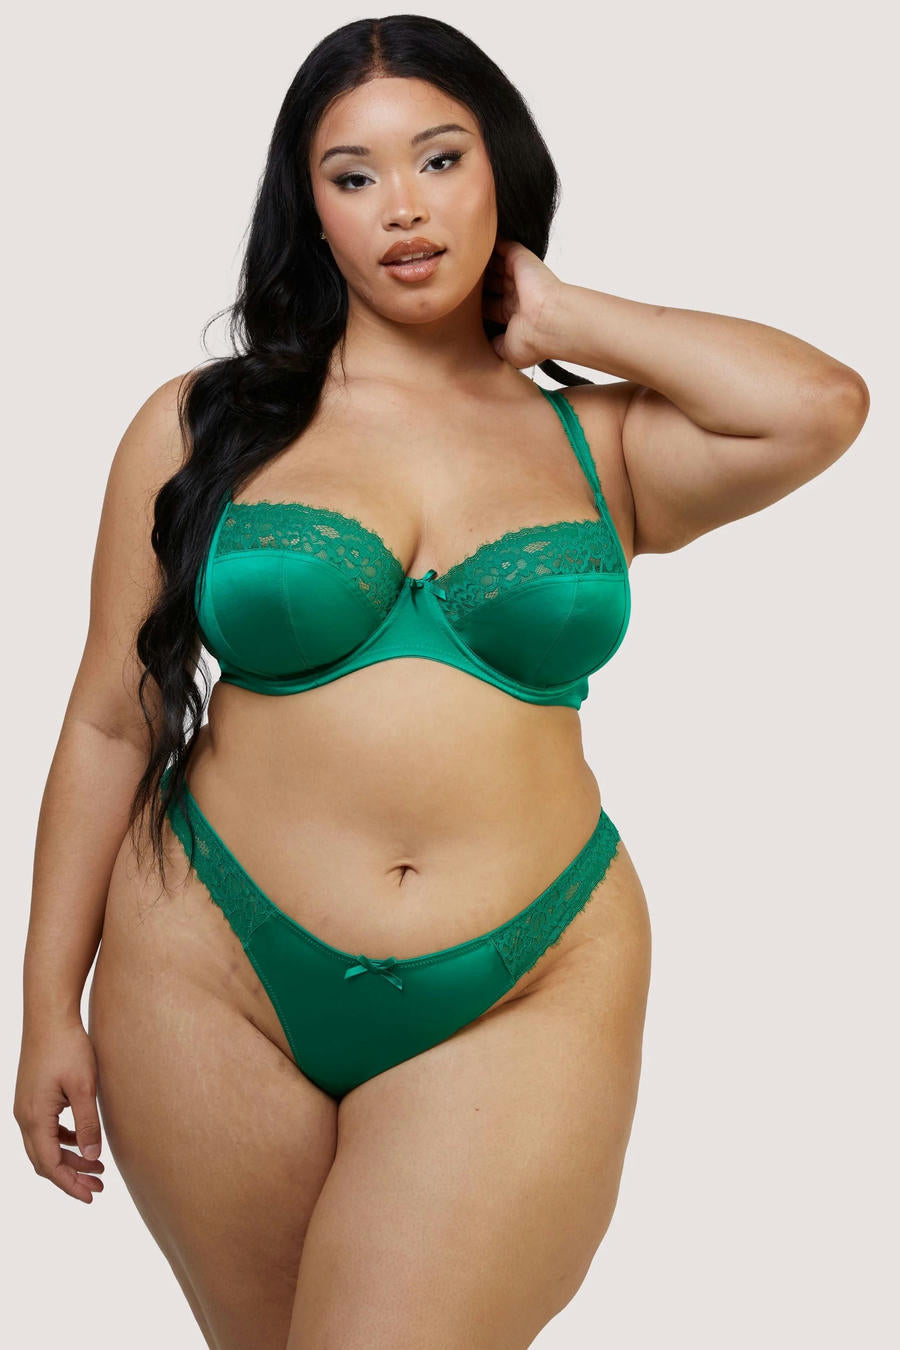 Rosalyn Emerald Satin Lace Bra - 30-40 bands and D-G cups (UK size)